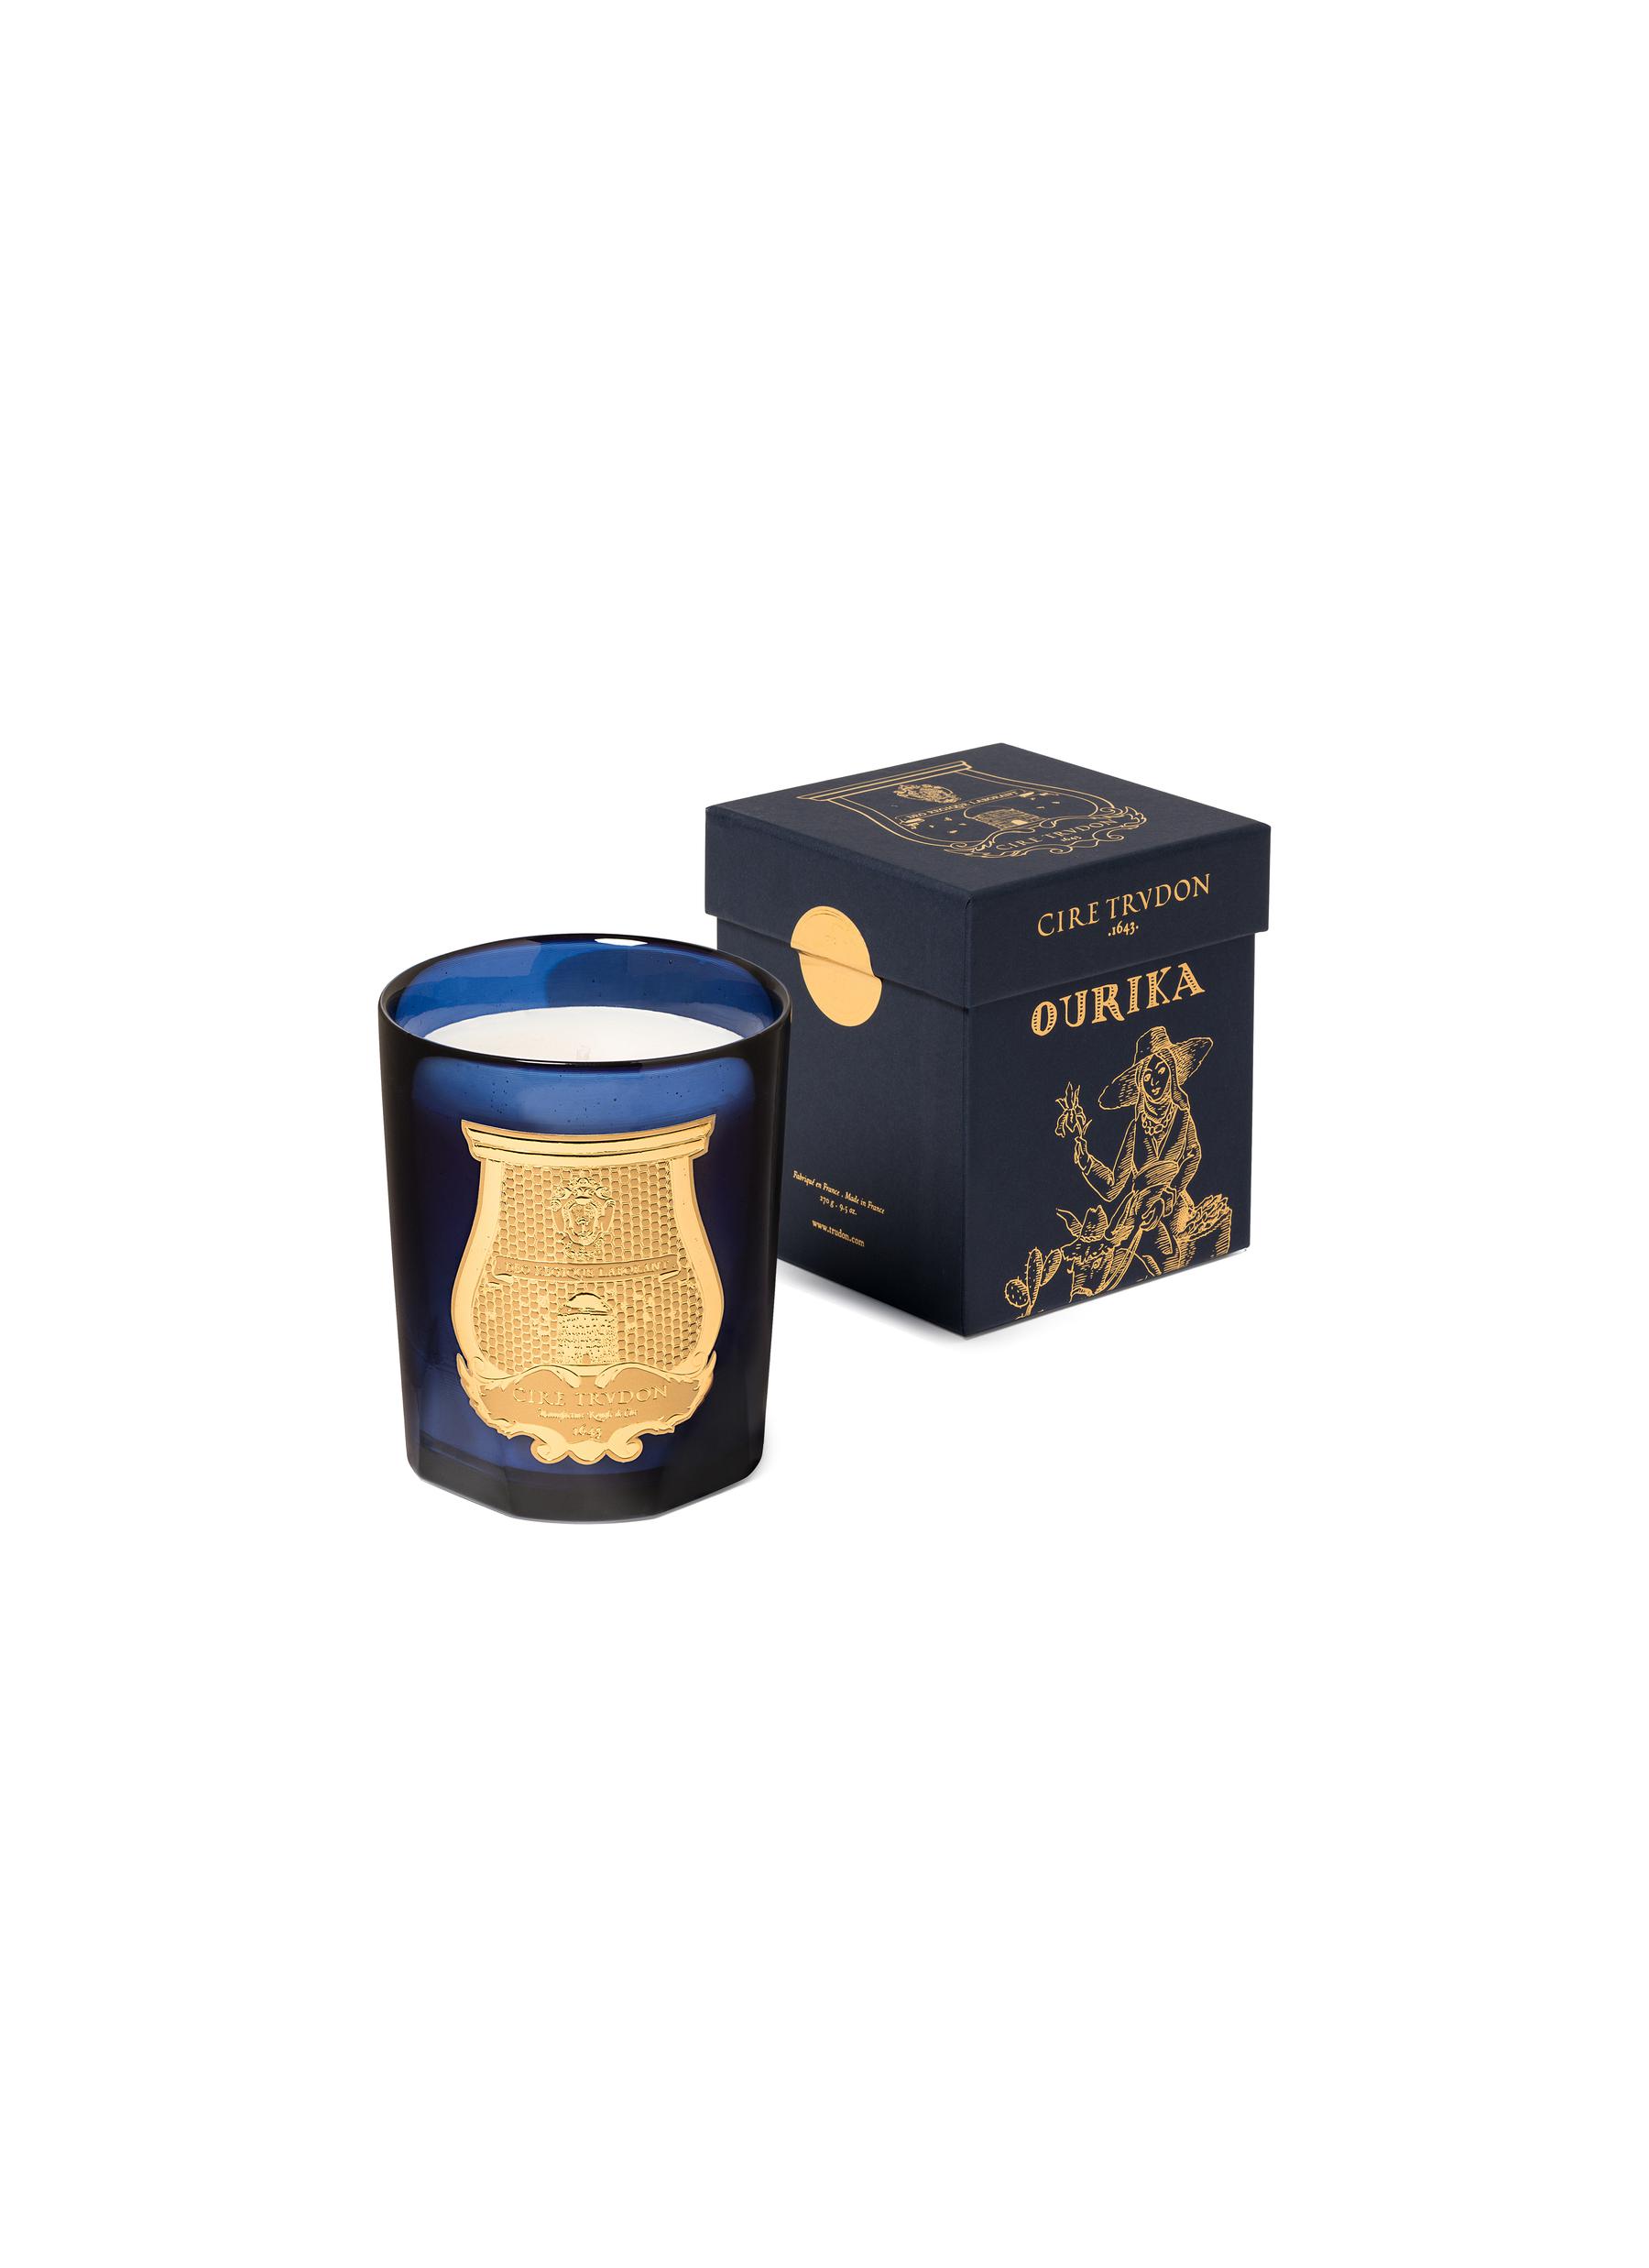 Ourika Scented Candle 270g